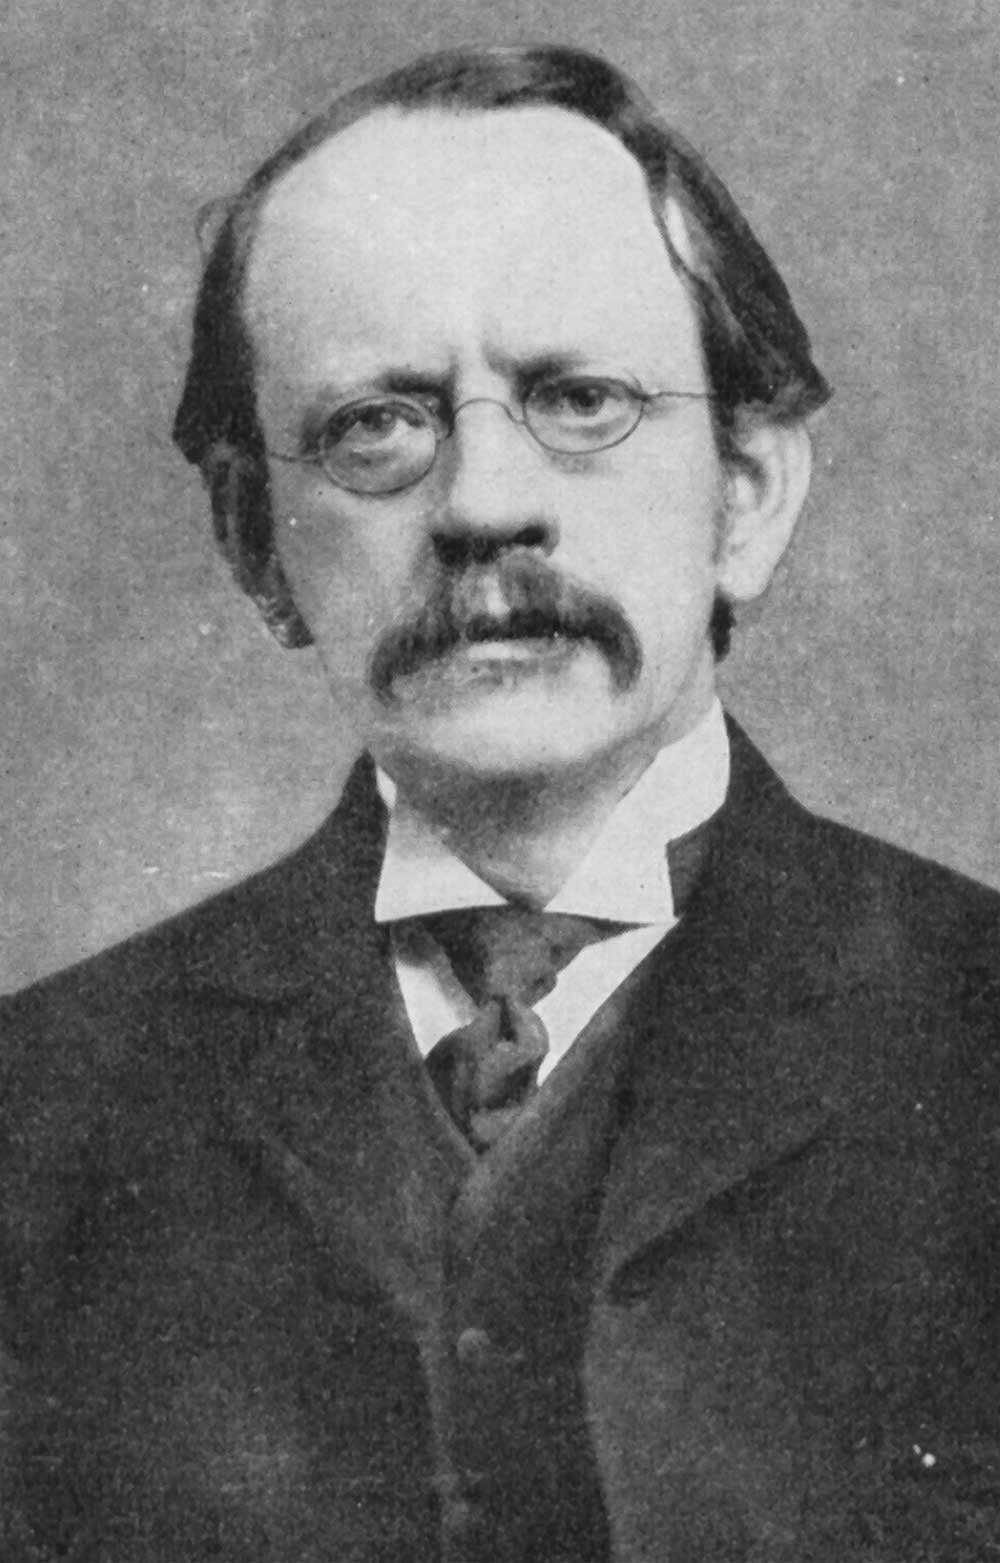 J.J. Thomson won the Nobel Prize in Physics 1906 for showing that the electron is a particle. His son, George Paget Thomson, won the Nobel Prize in Physics 1937 for showing that the electron is a wave.